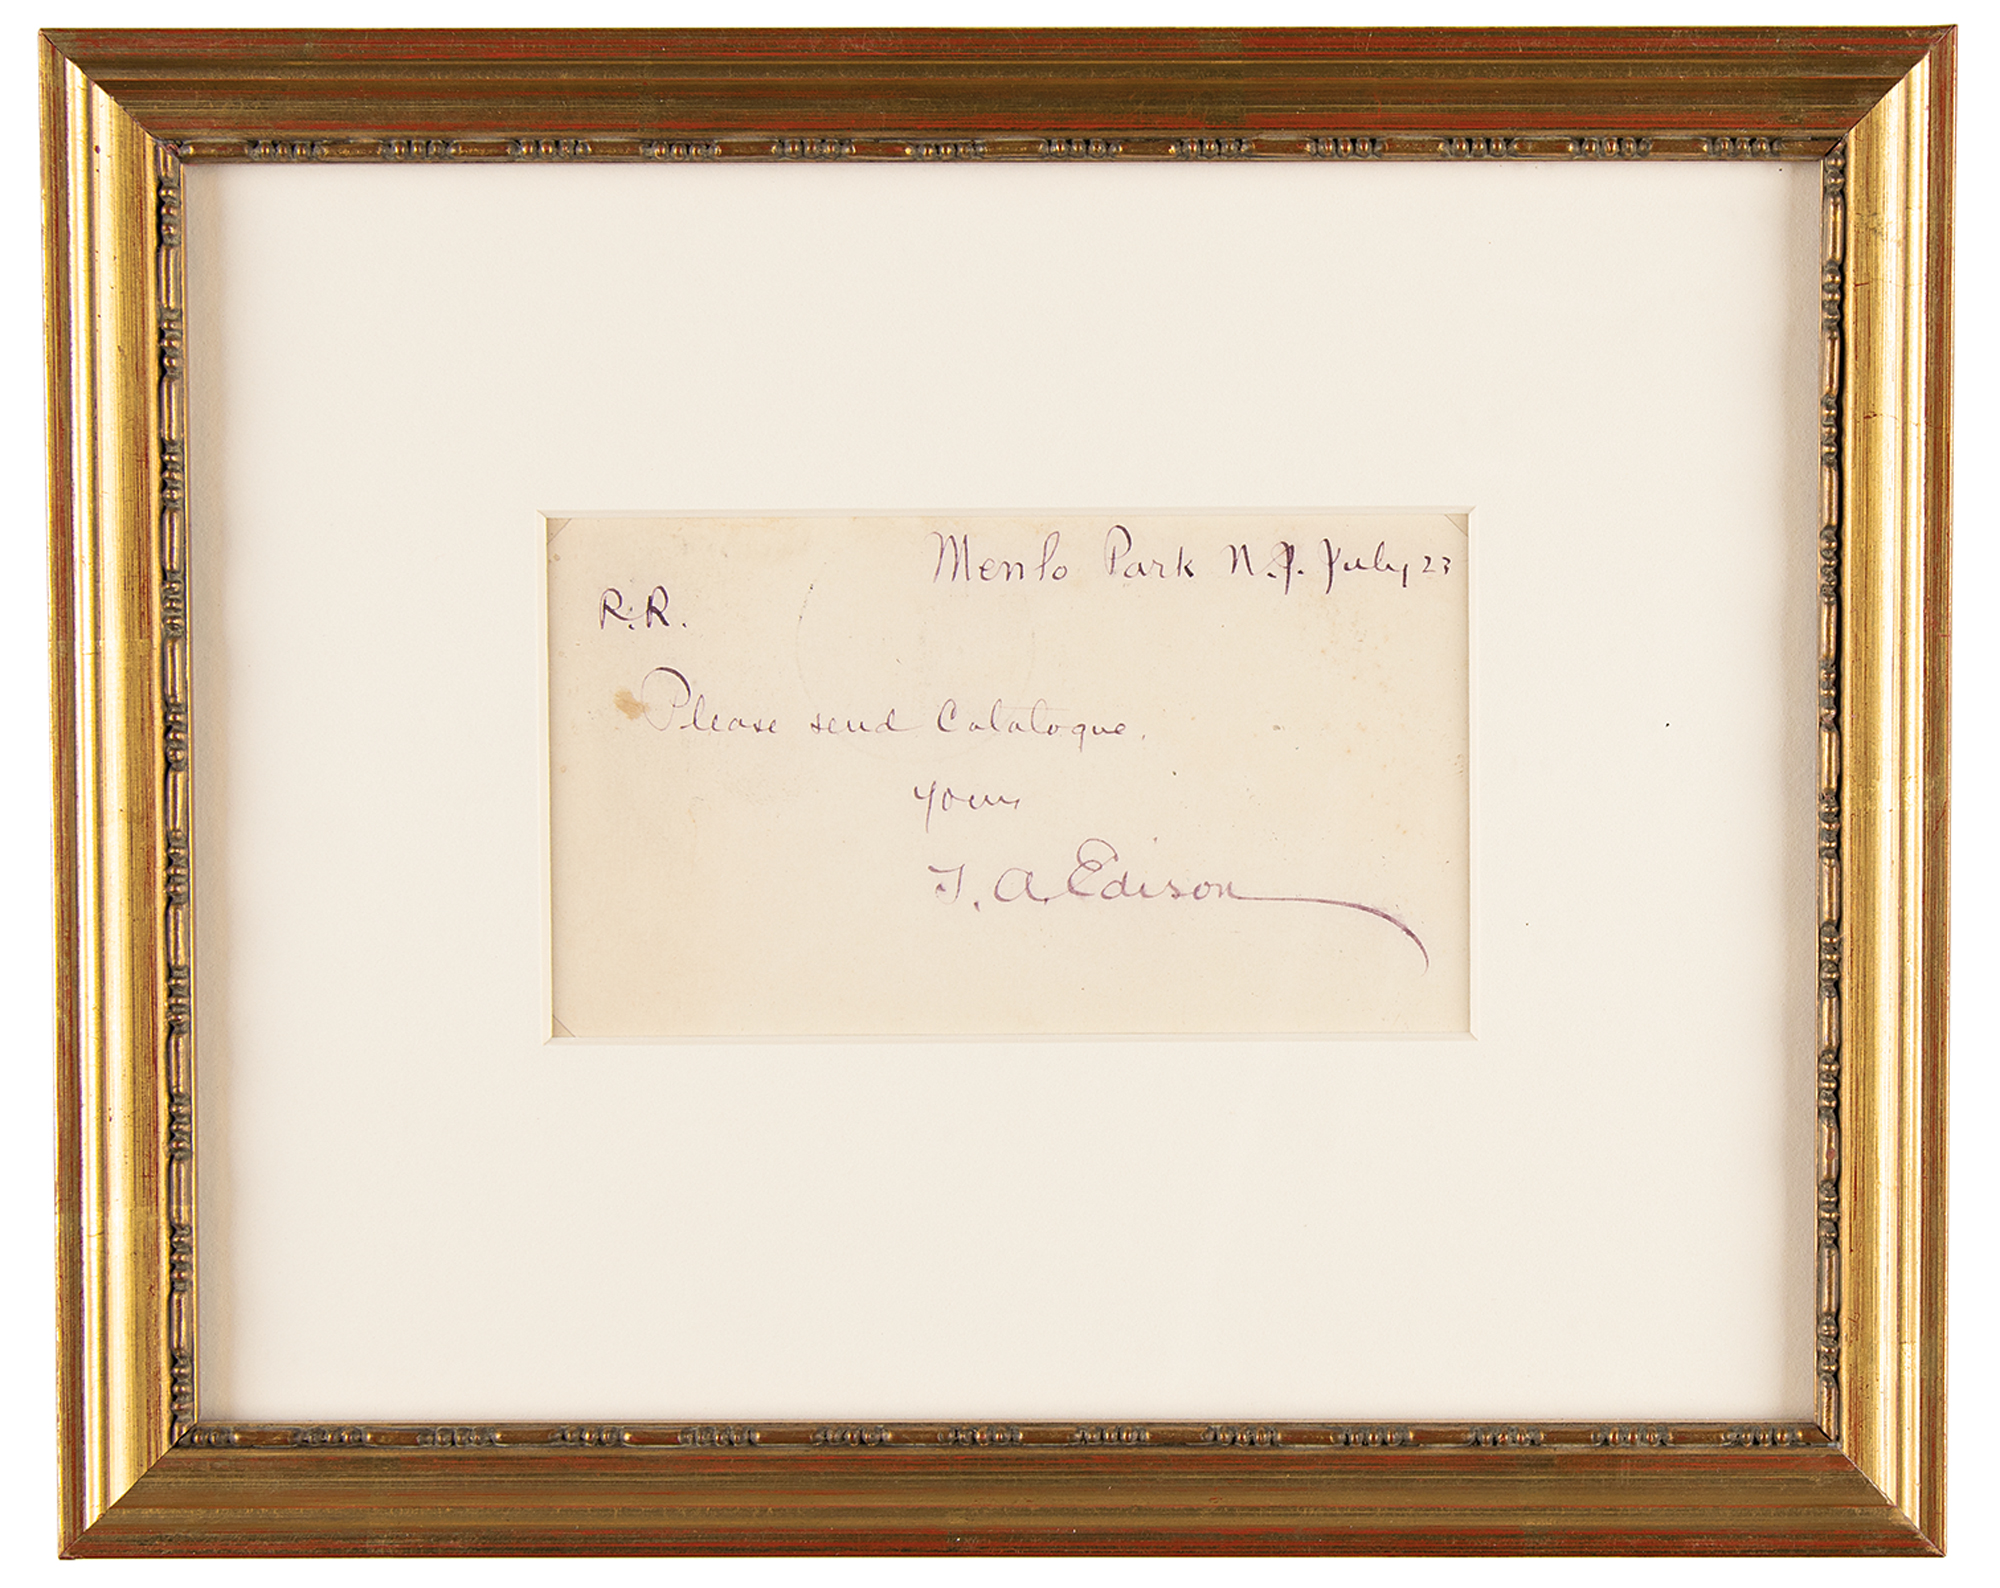 Thomas Edison Autograph Note Signed | Sold for $2,505 | RR Auction